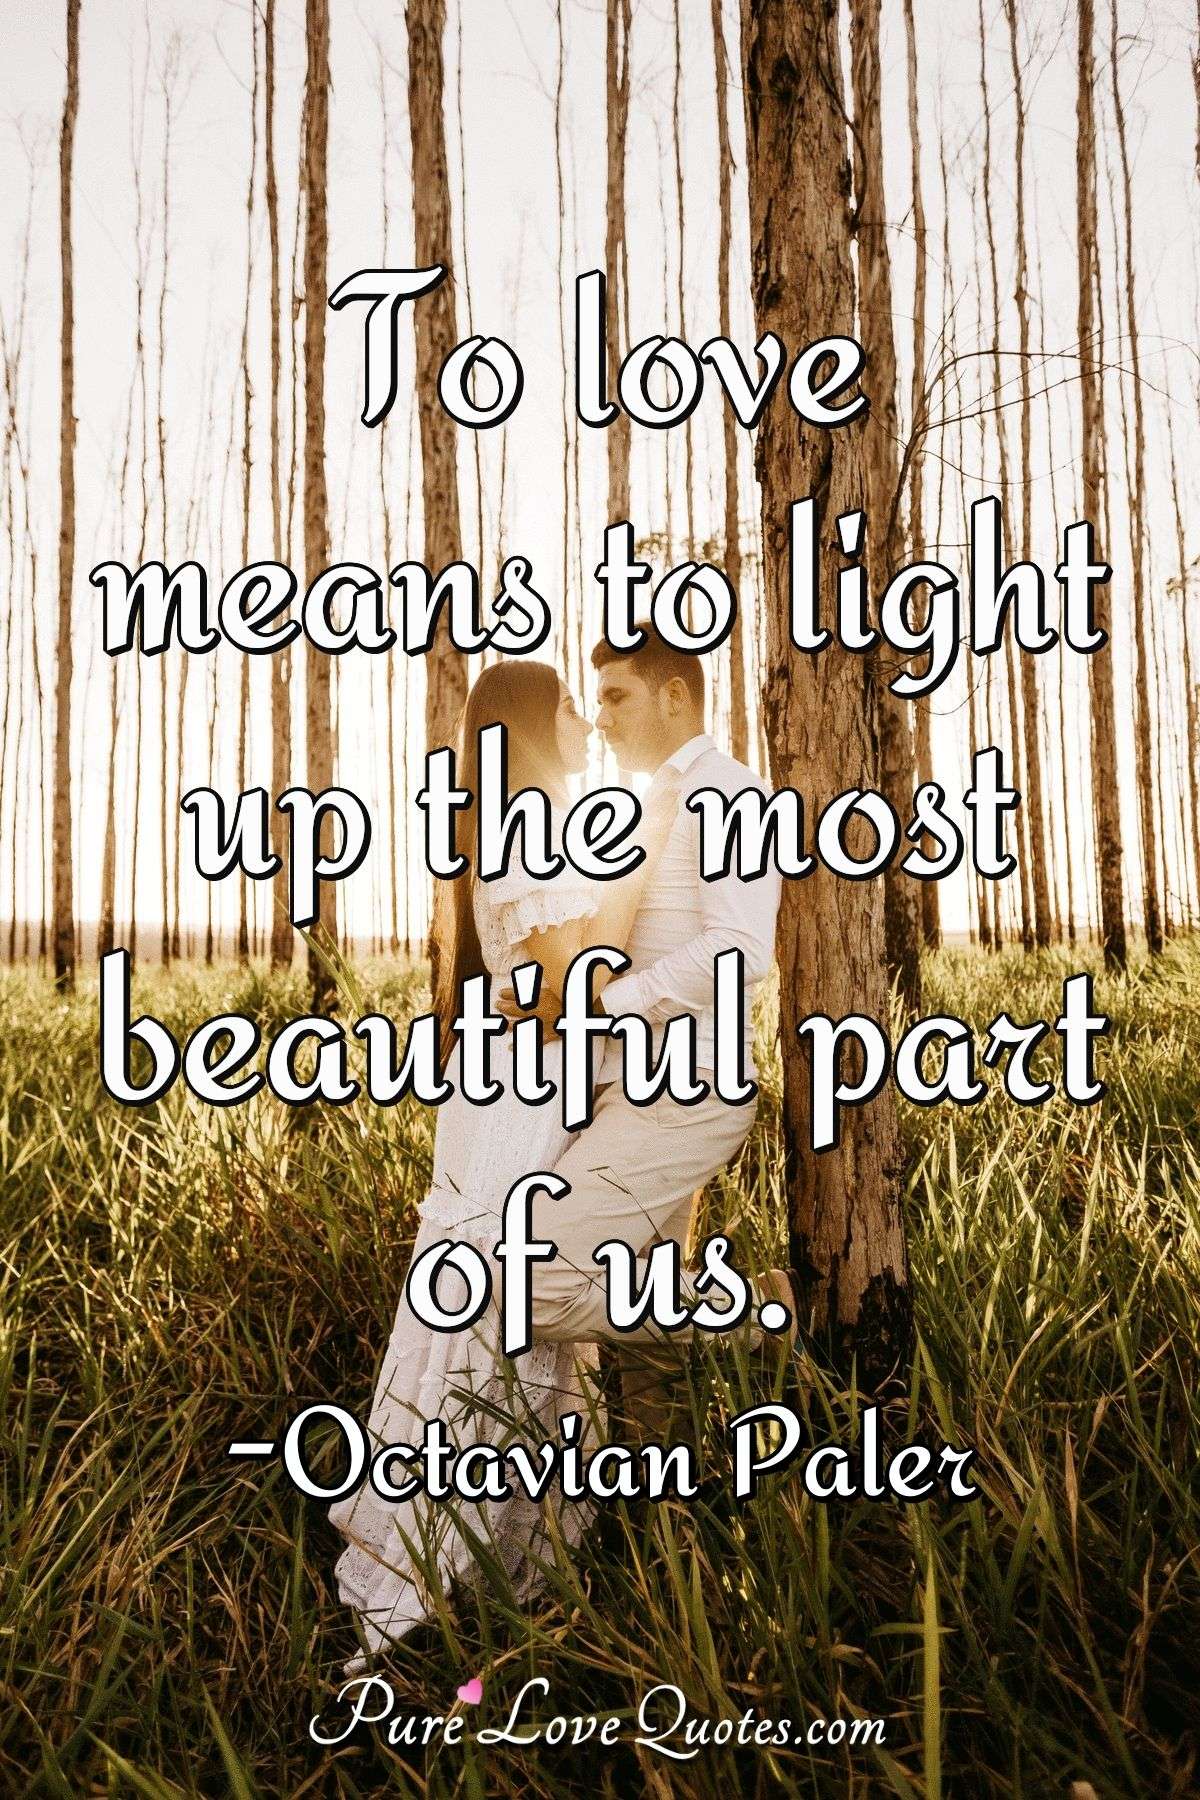 To love means to light up the most beautiful part of us. - Octavian Paler